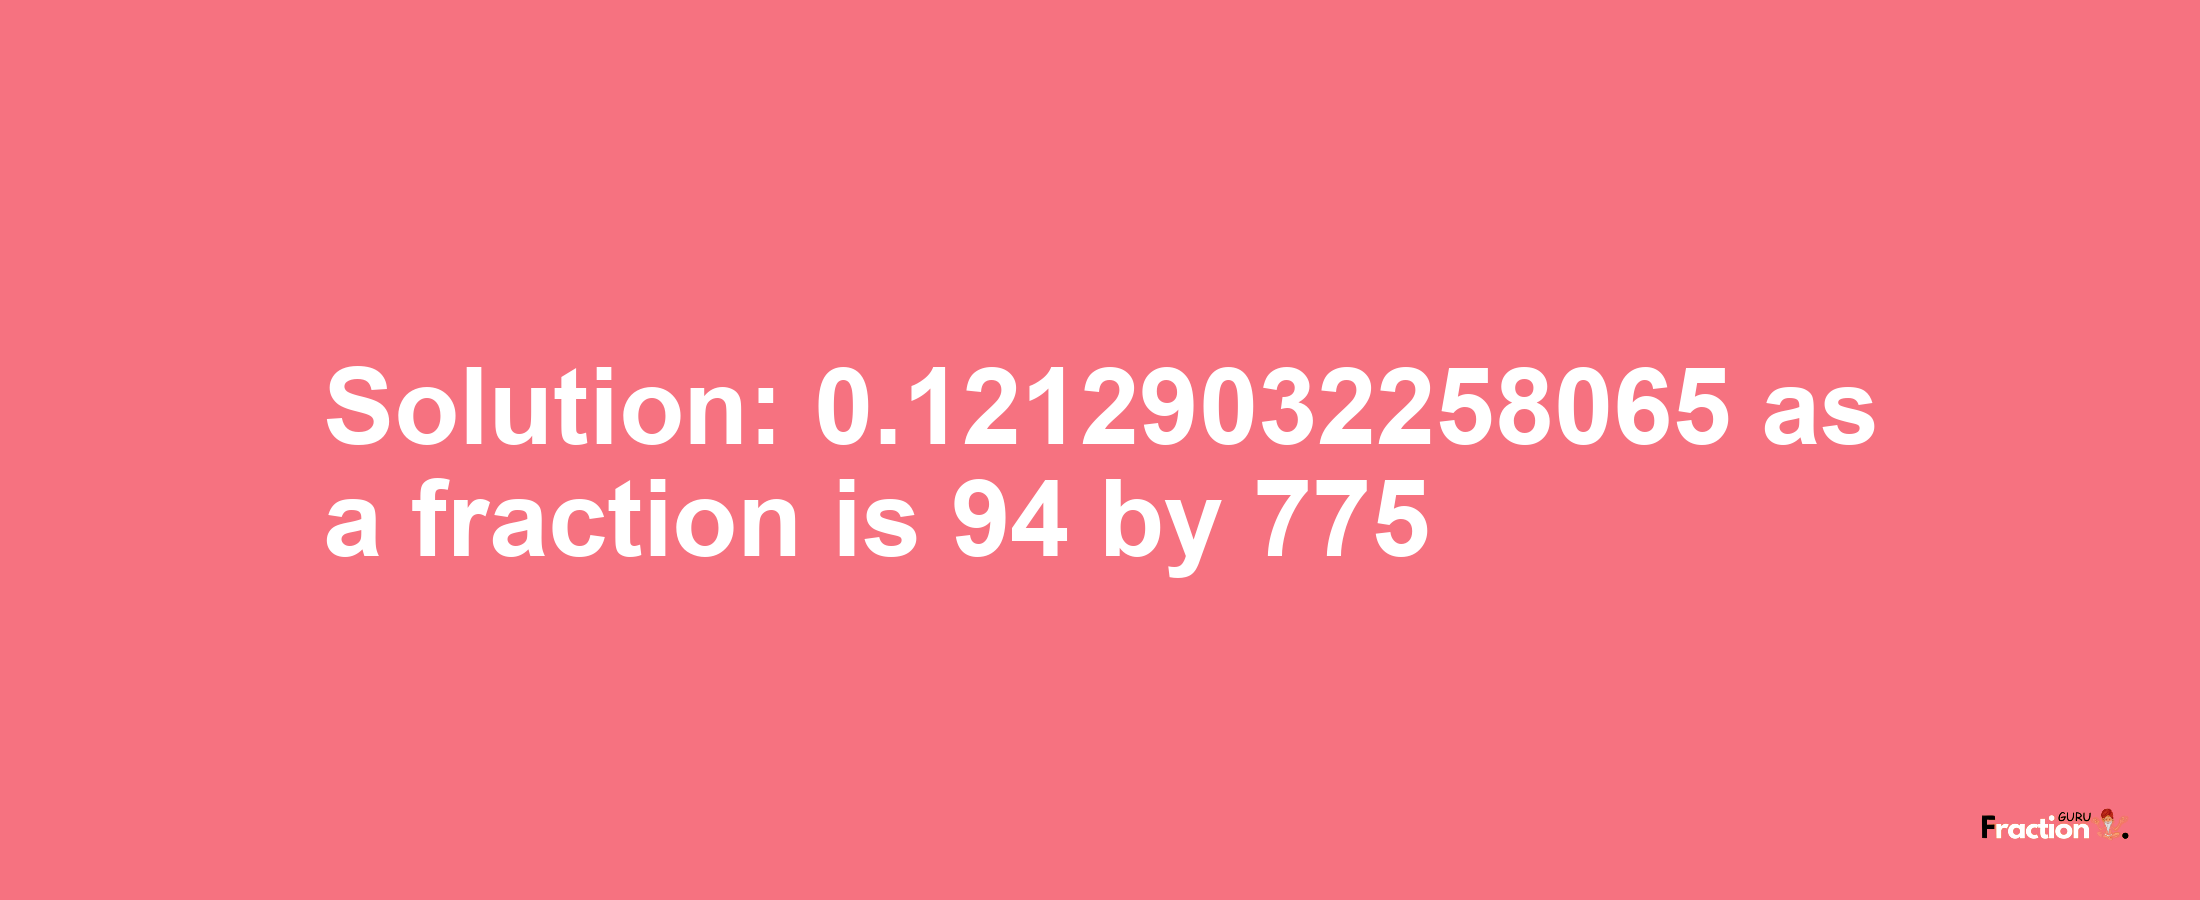 Solution:0.12129032258065 as a fraction is 94/775